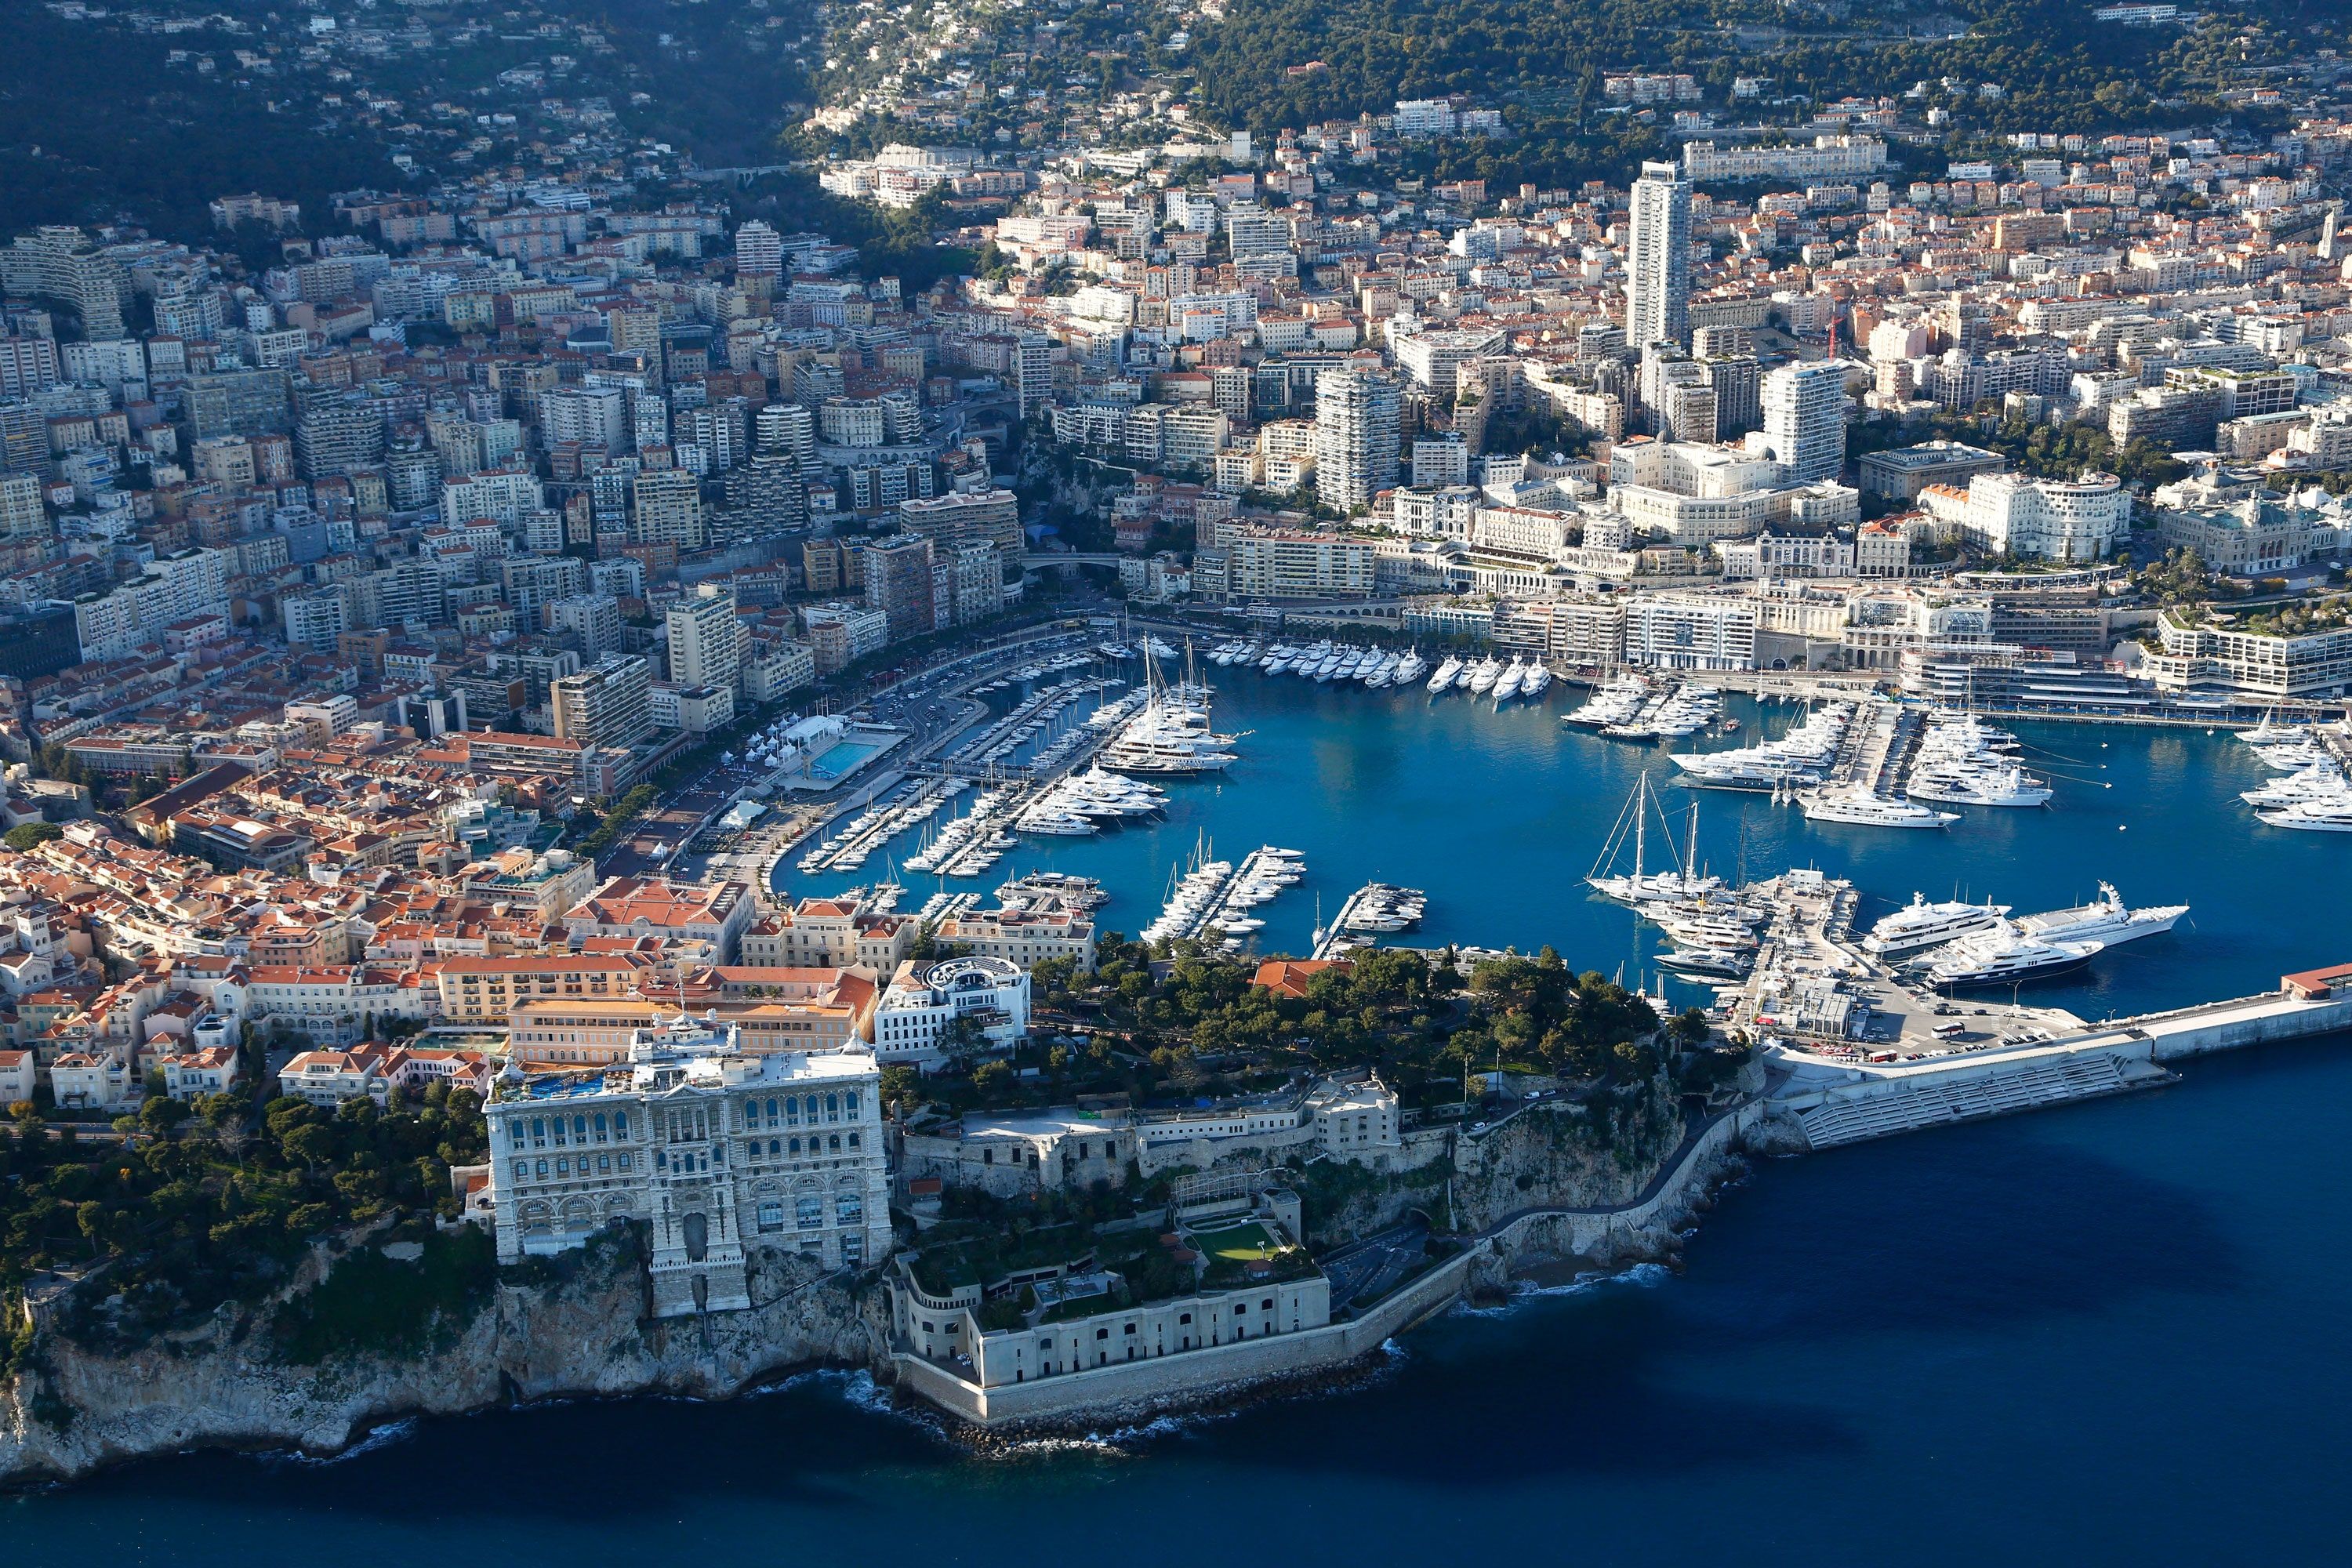 Monaco Travel Guide: What to Do, Where to Stay, Eat, & More